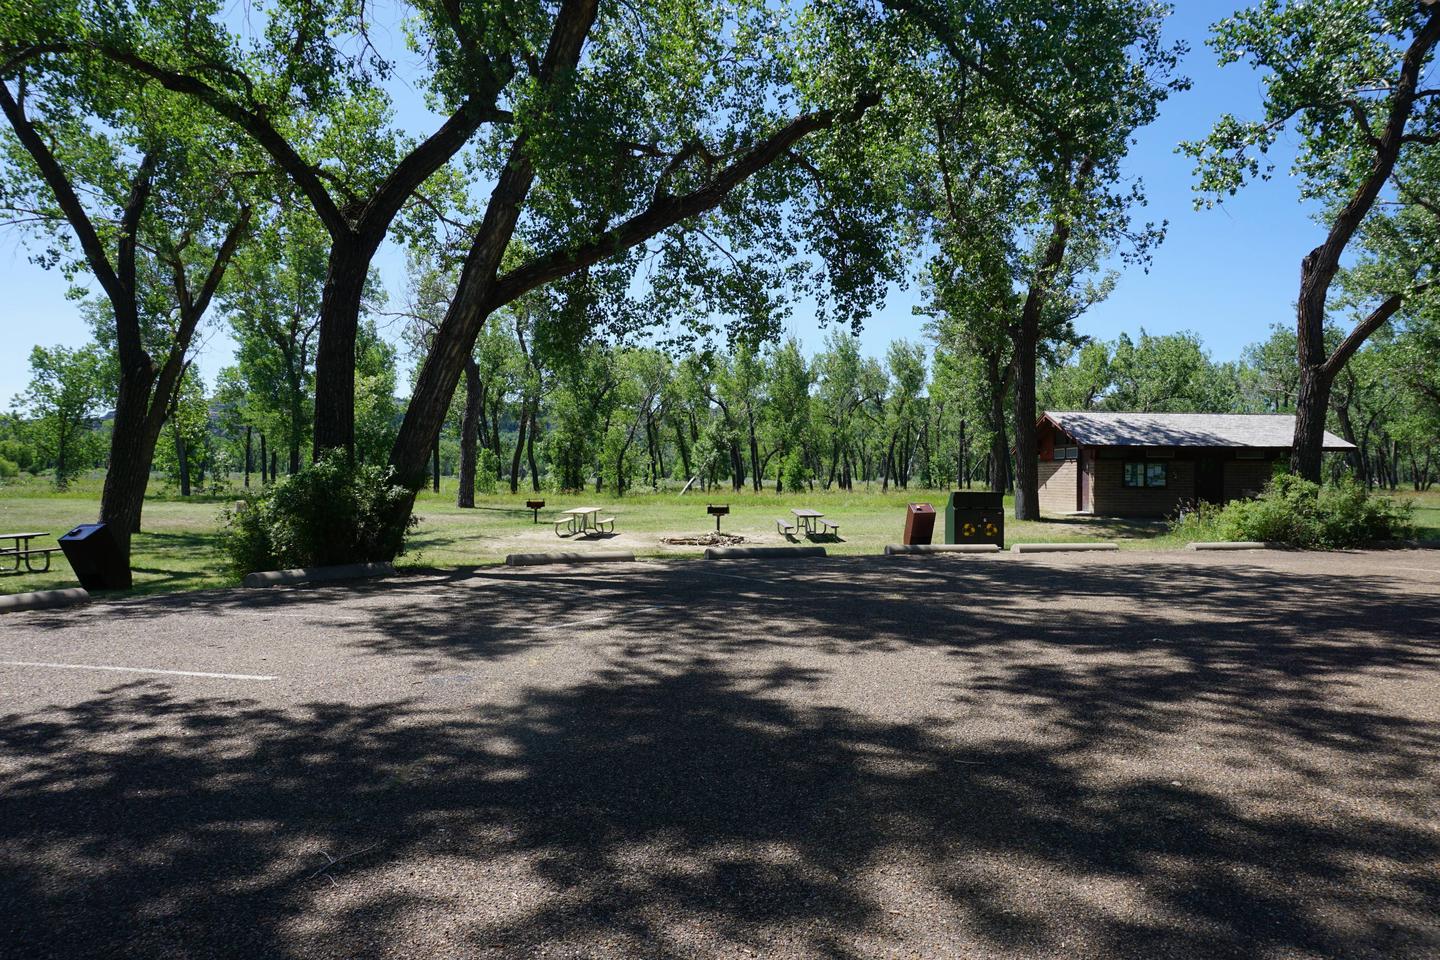 Parking area with the restroom and picnic tables in the distance